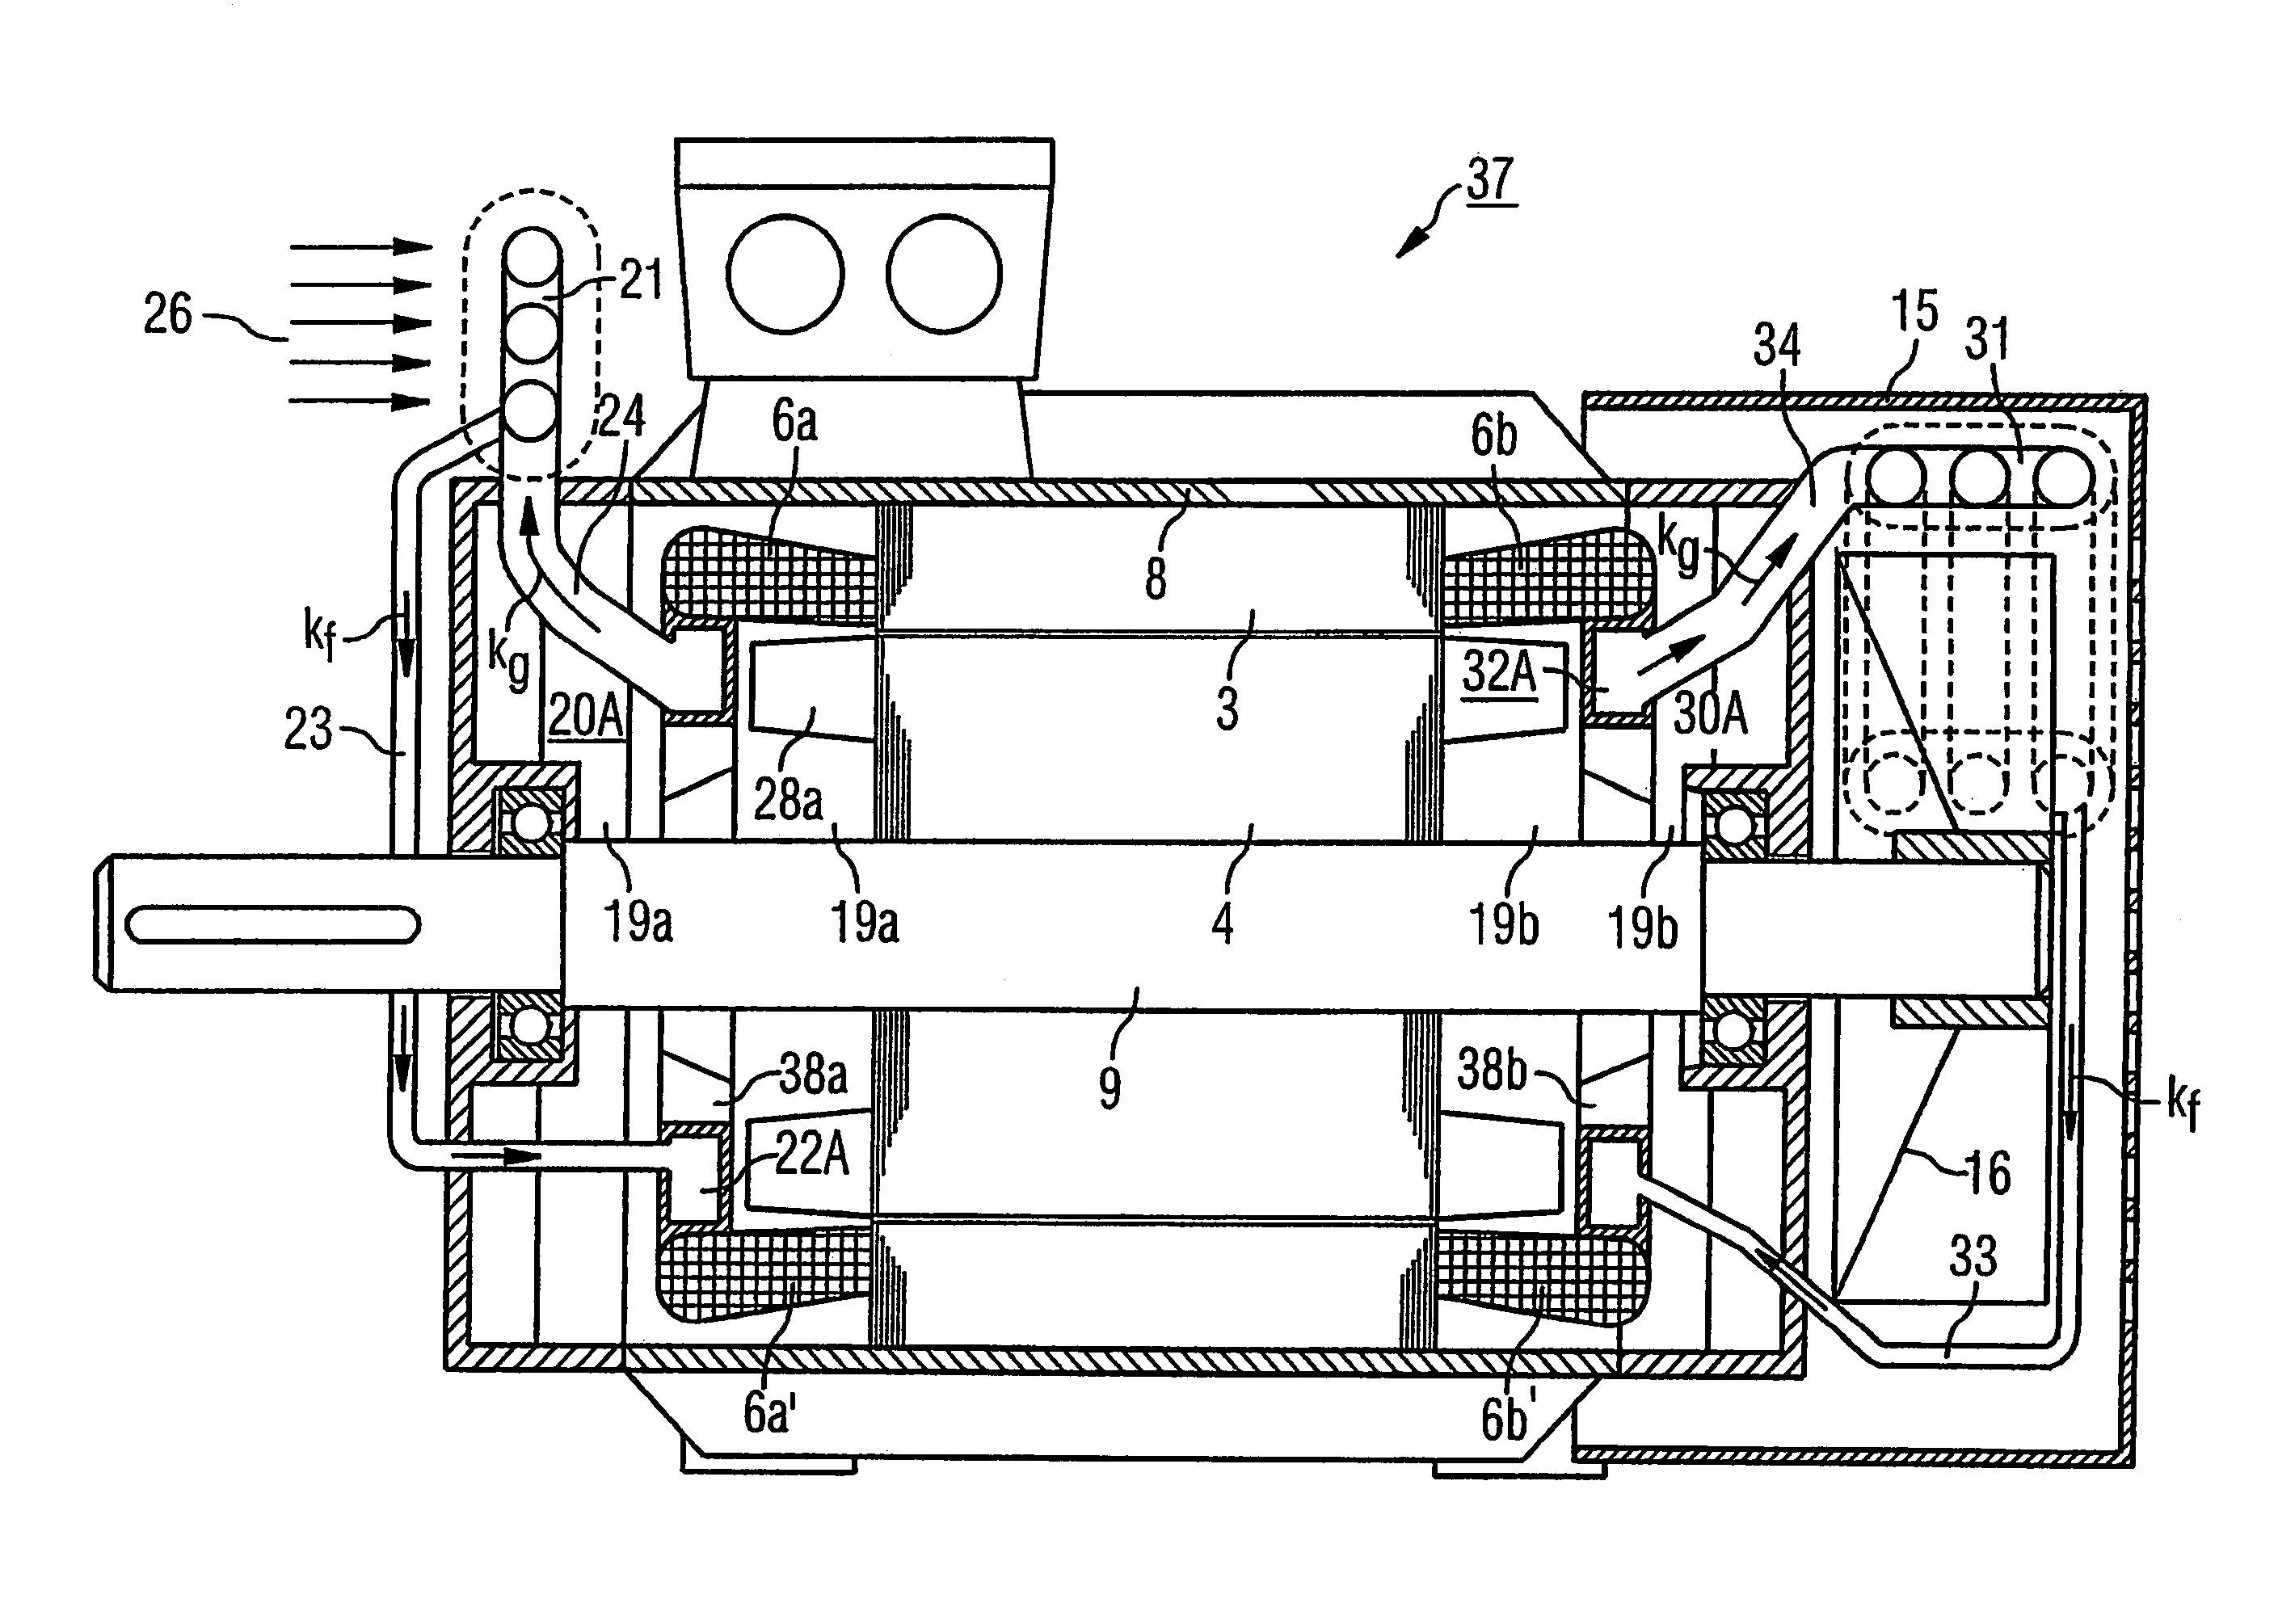 Electric machine with thermosiphon-type cooling system